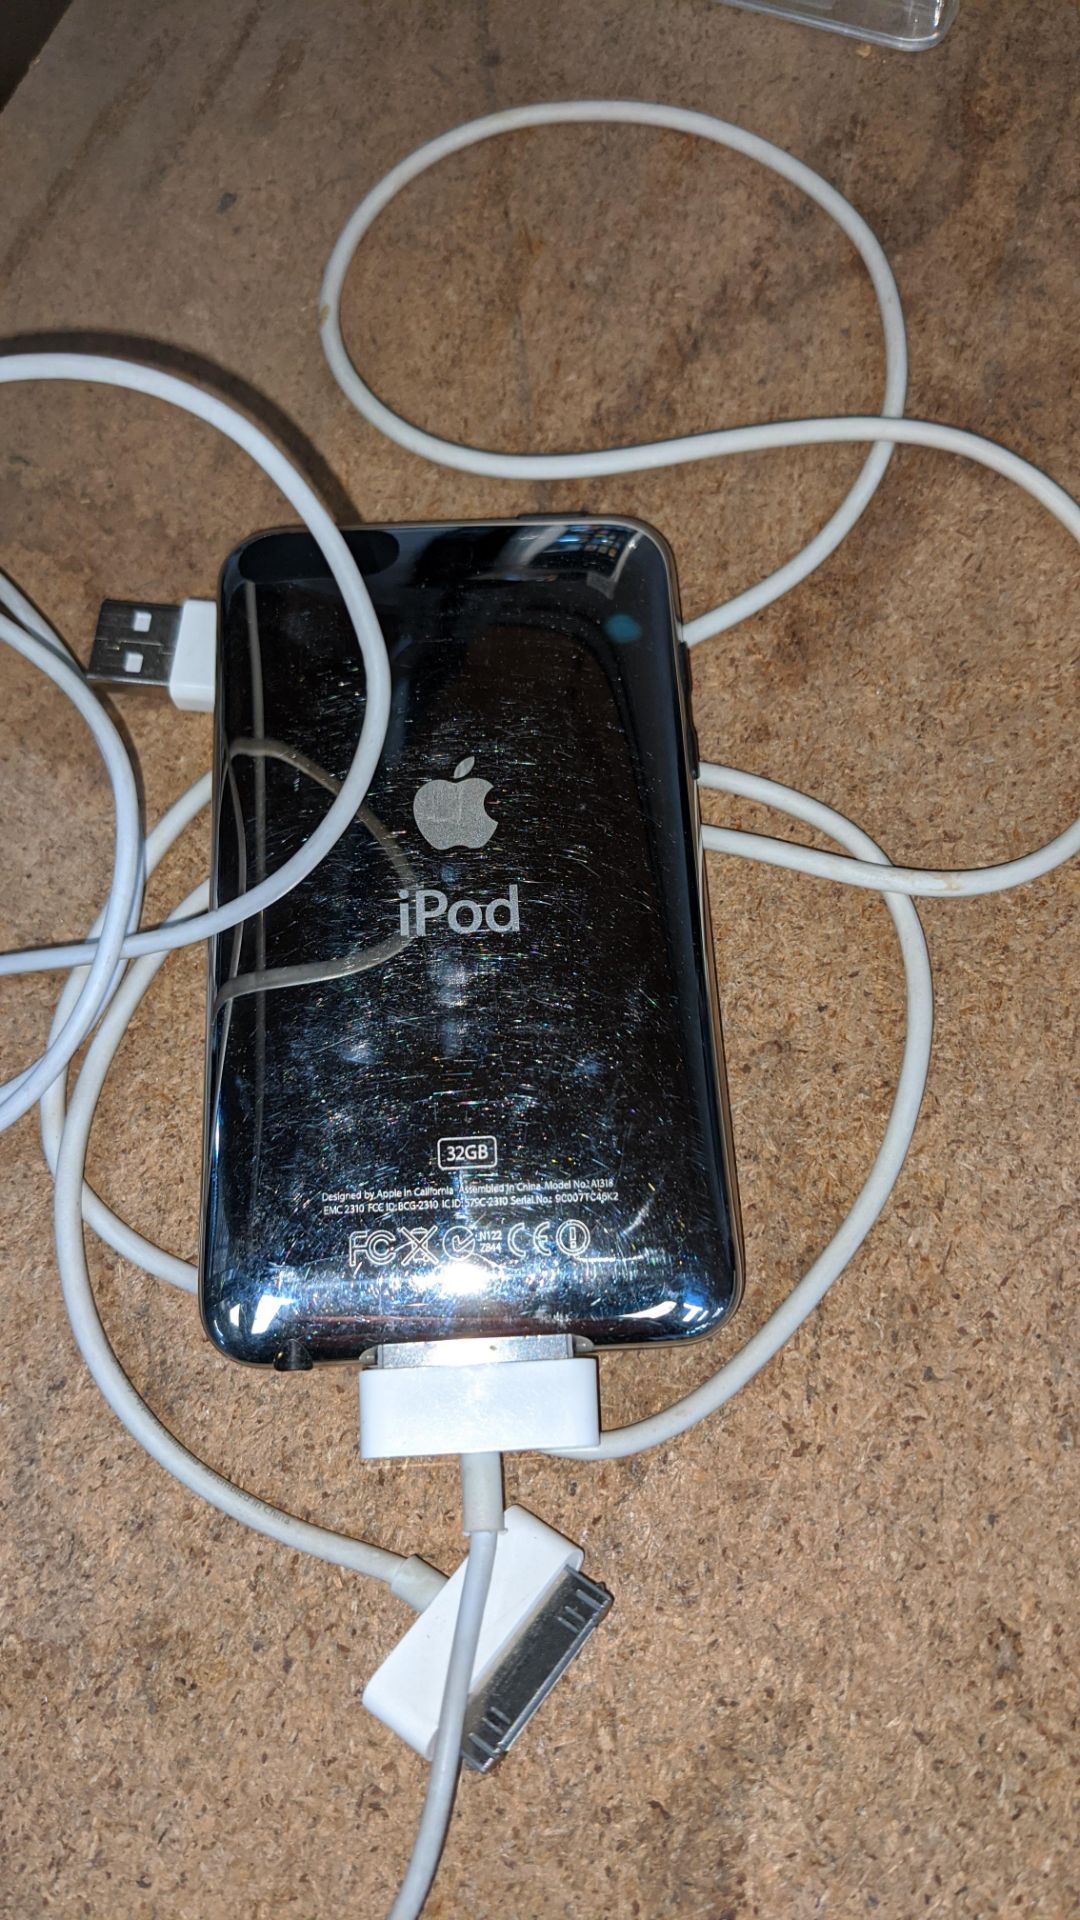 Apple iPod Touch Second Generation 32GB model A1318/EMC2310. Includes 2 off Apple cables plus box - Image 6 of 15